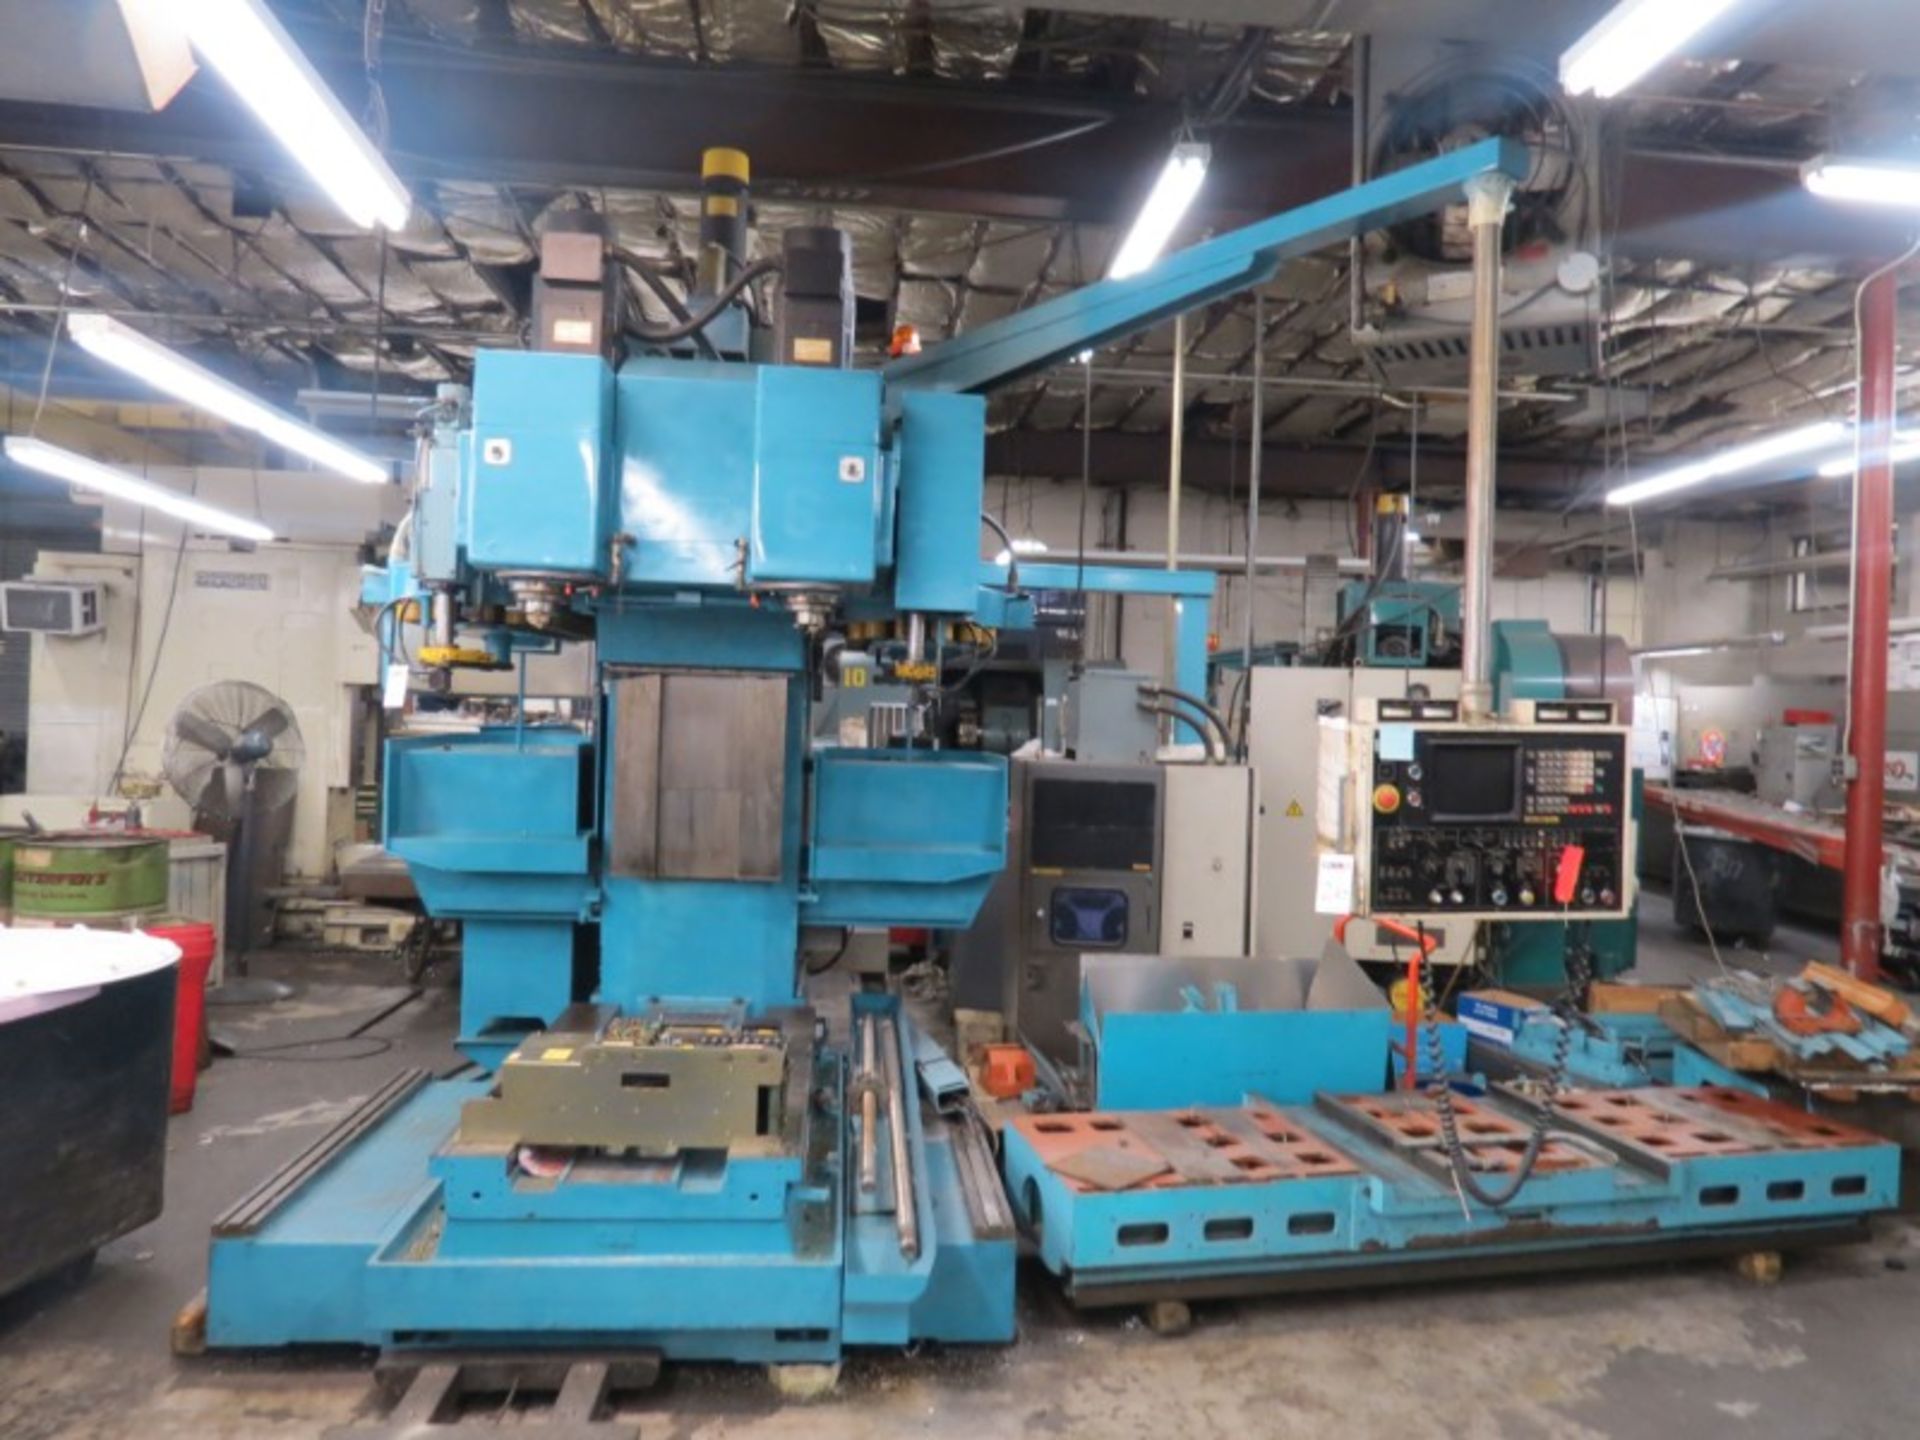 Matsuura MC -1500V-DC Twin Spindle VMC (PARTS ONLY) (Located in Hicksville, NY) - Image 2 of 12